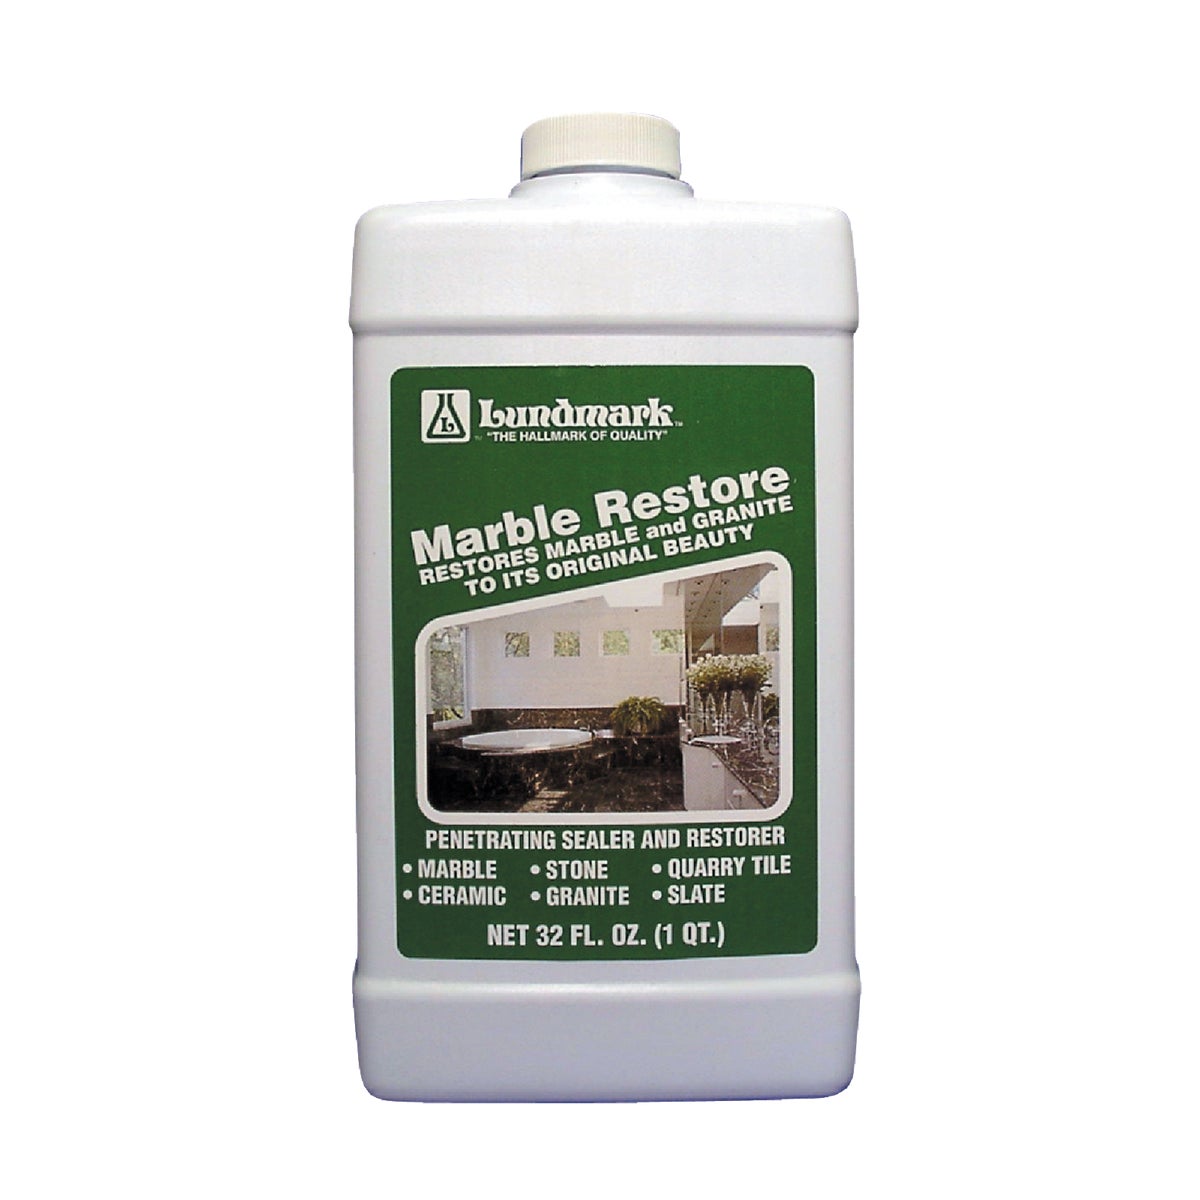 Item 602752, Excellent product for protecting, sealing, and restoring hard surface 